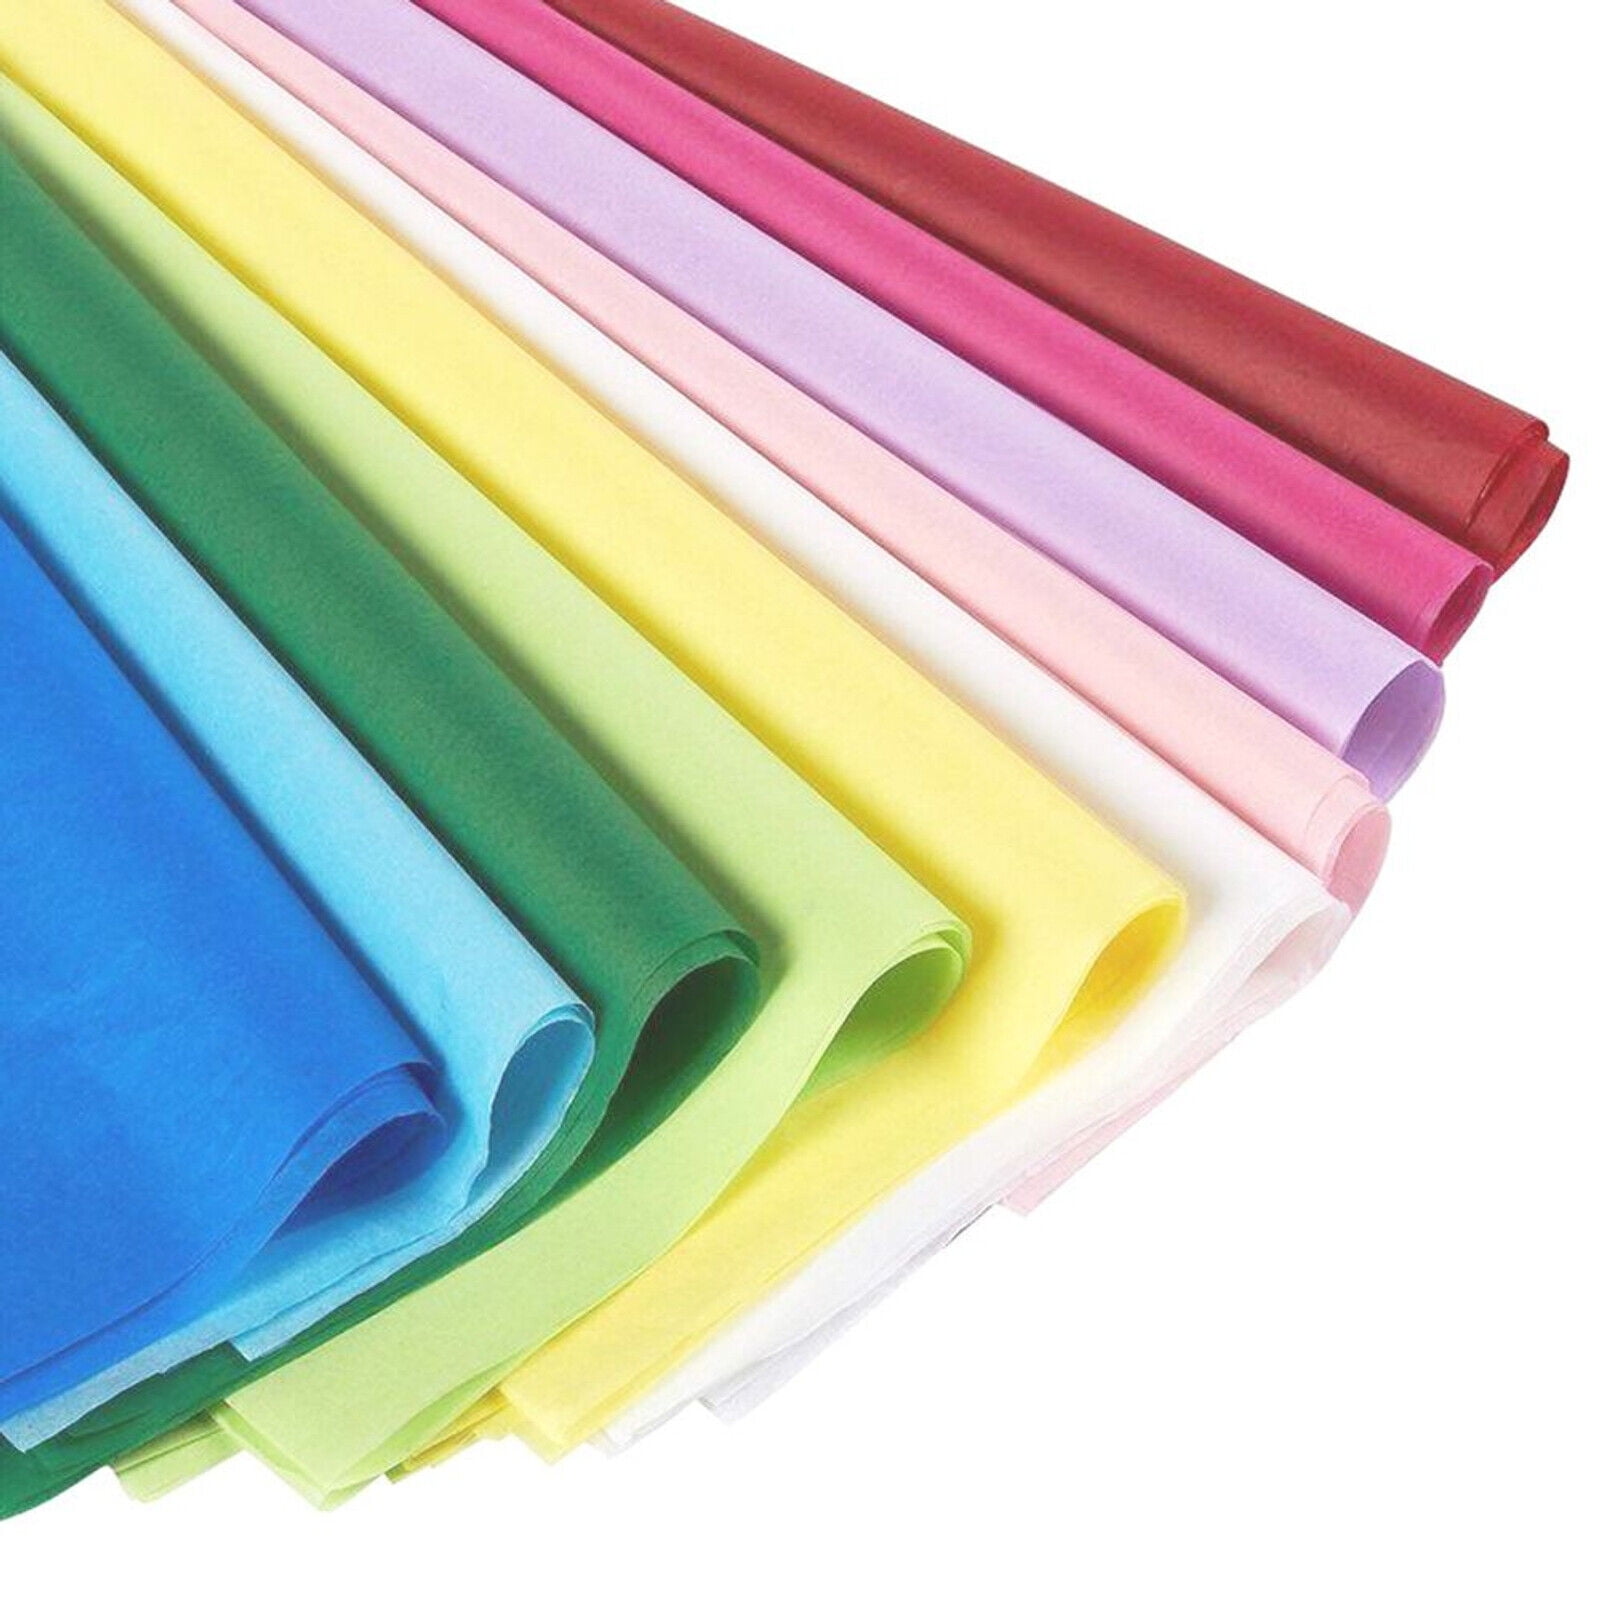 120 Sheets Tissue Paper For Gift Wrapping Bulk 10 Color Birthday Party 20  x 26 